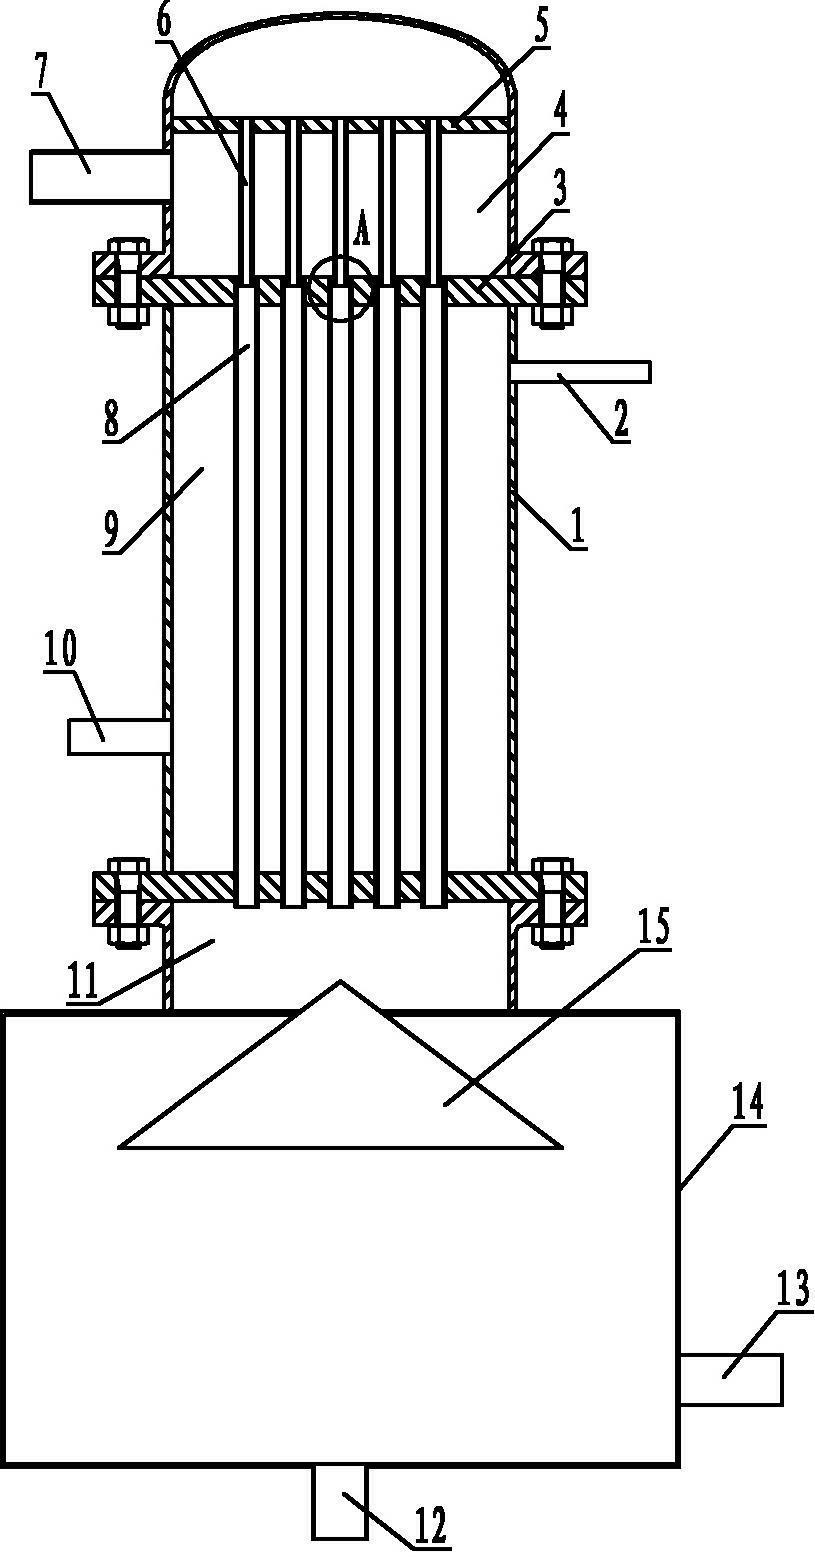 Device for dynamically preparing ice slurry